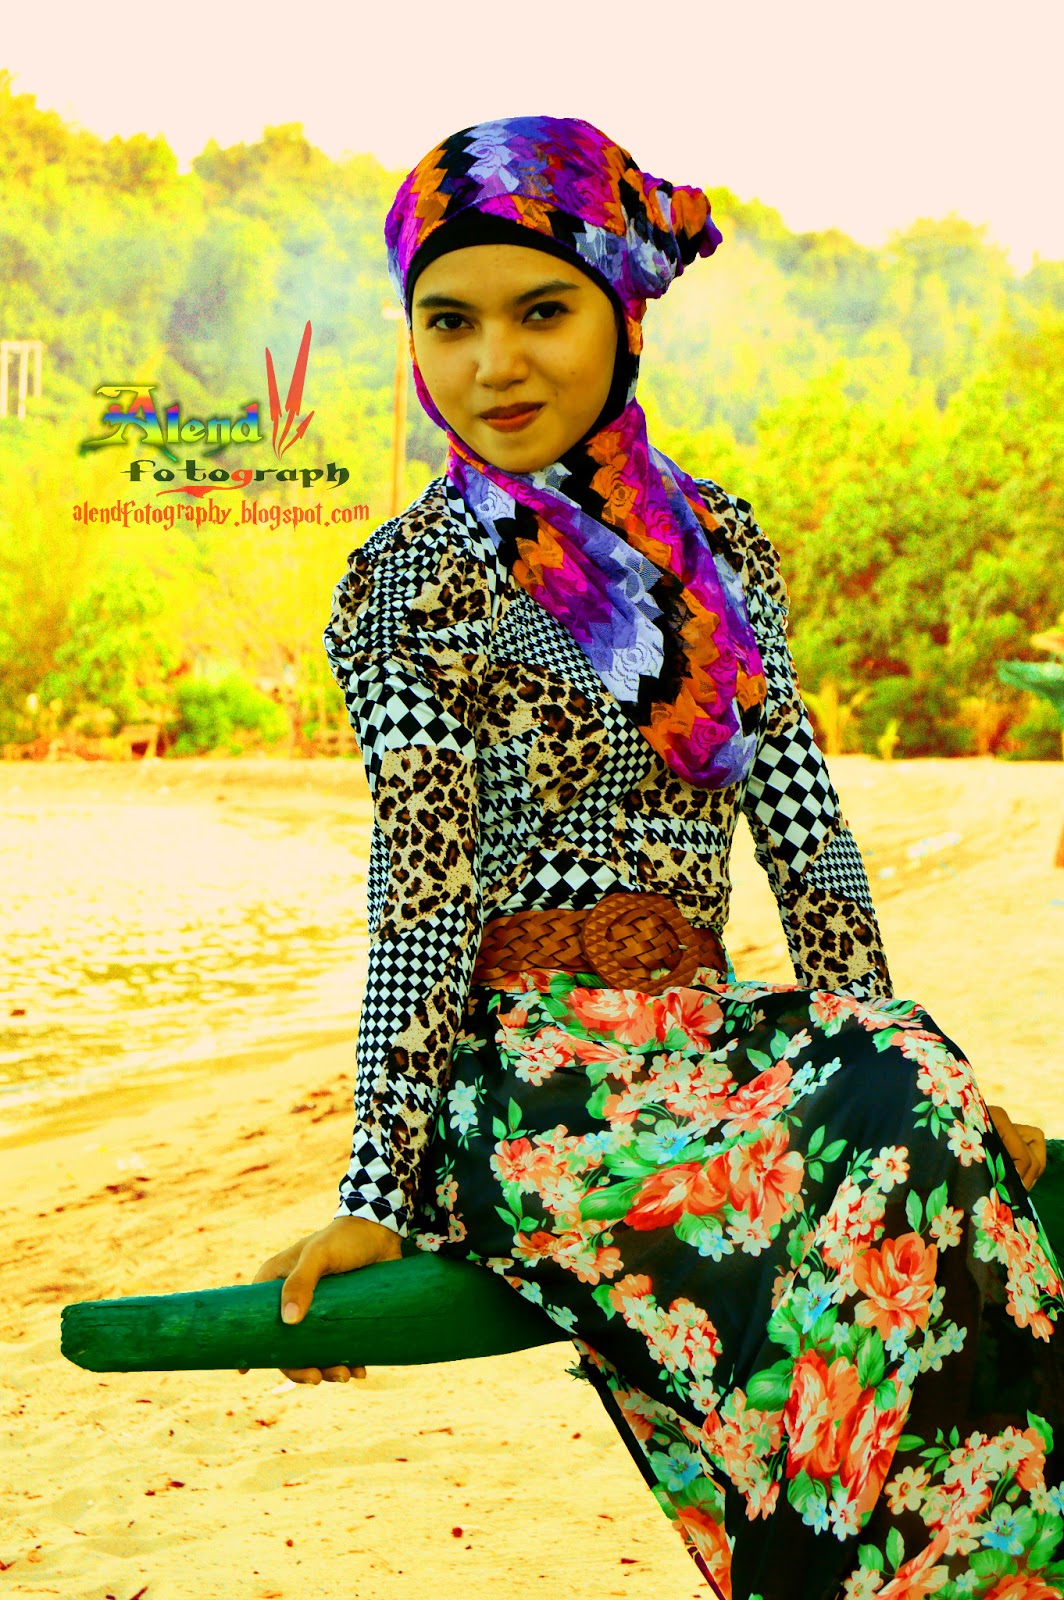 Alend Fotograph Indonesia Model Photography